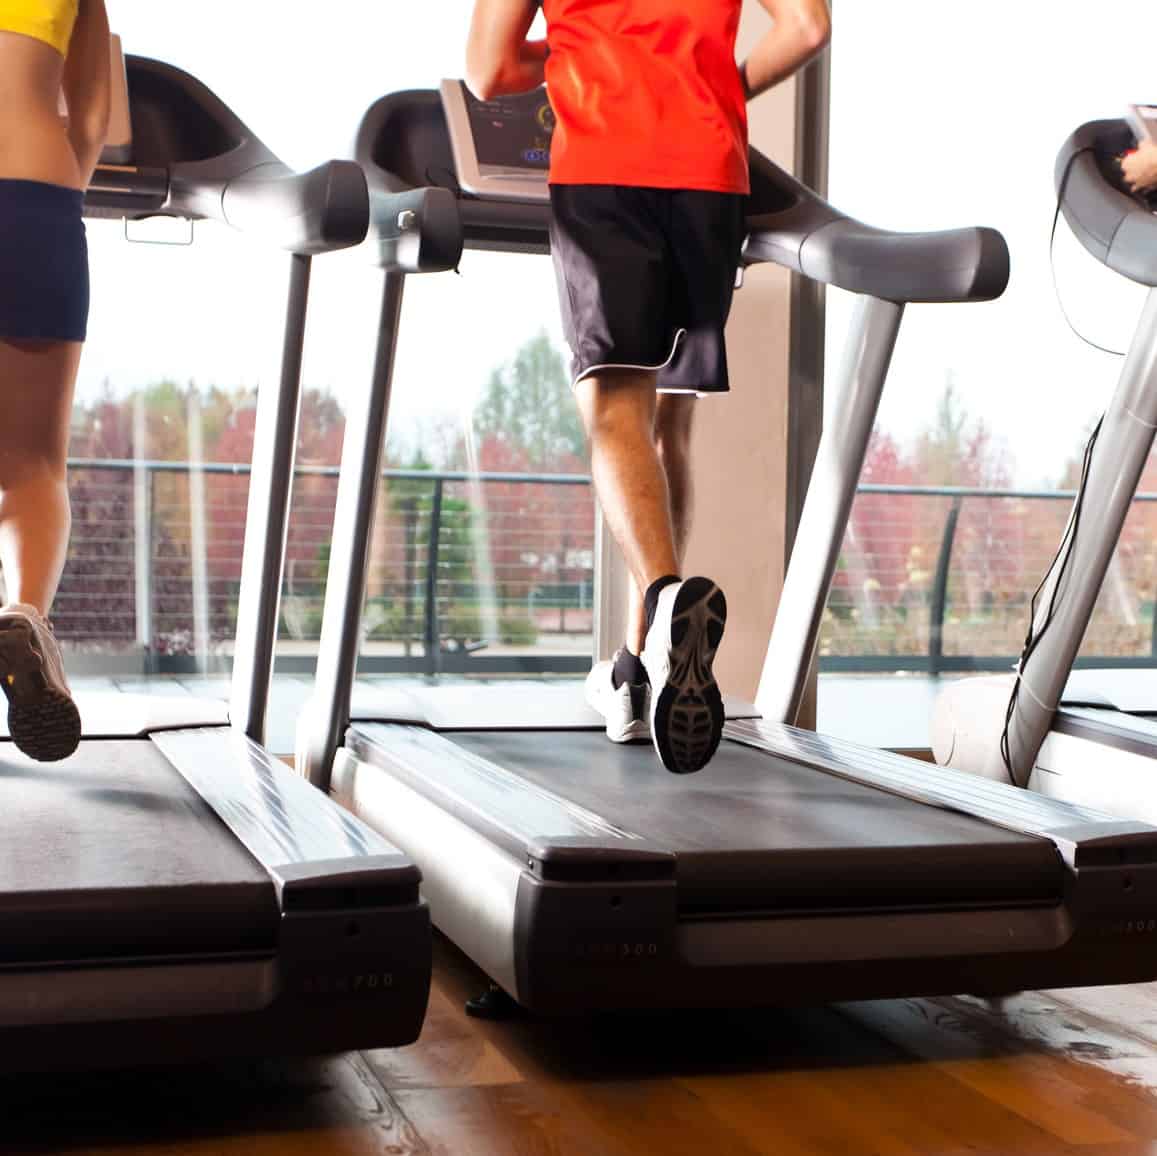 Treadmill Pace Chart: Speed Conversions from MPH to Pace